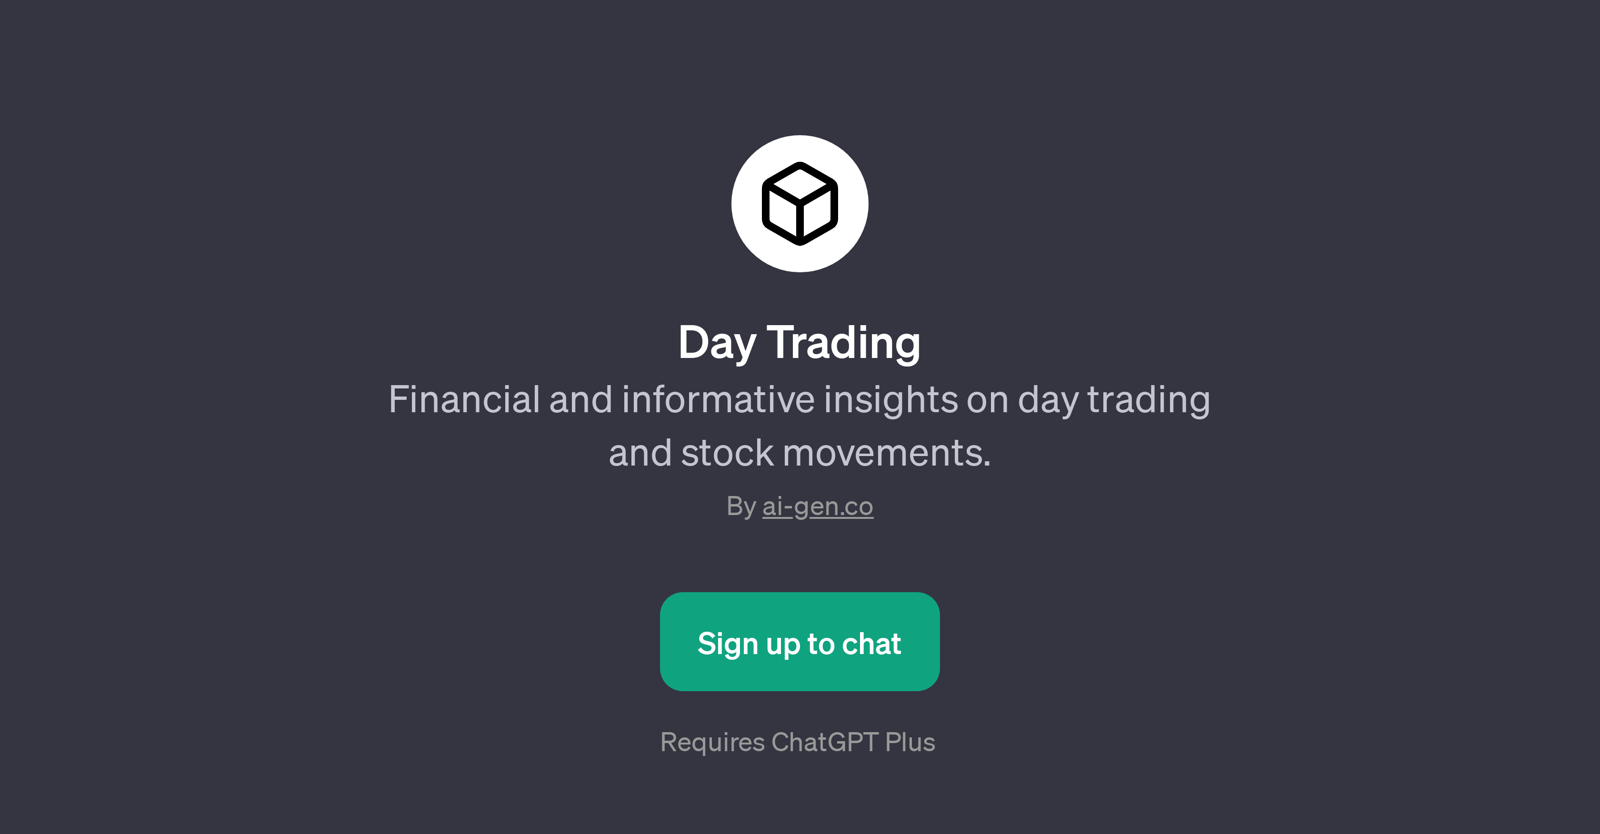 Day Trading website